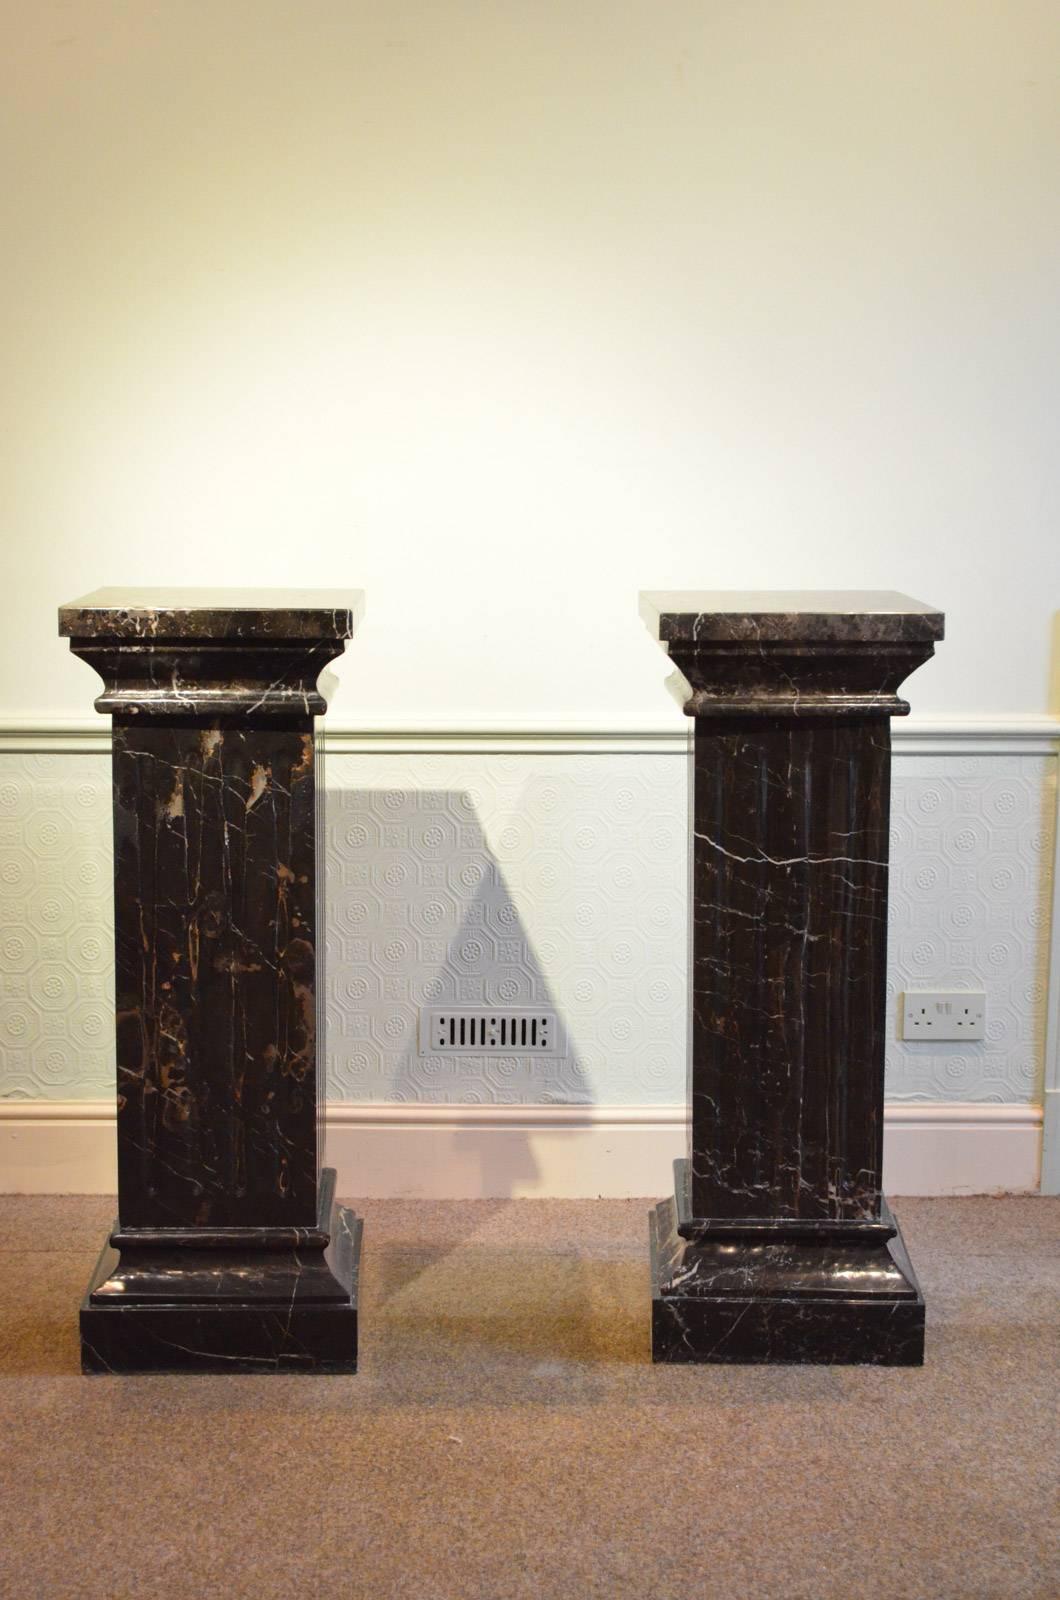 Sn4231  A superb pair of 19th century black veined columns, each having generous top being 40cm x40cm with concave frieze and fluted body terminating in moulded base. This pair of antique columns is hand made in solid marble. c1850
H43.5